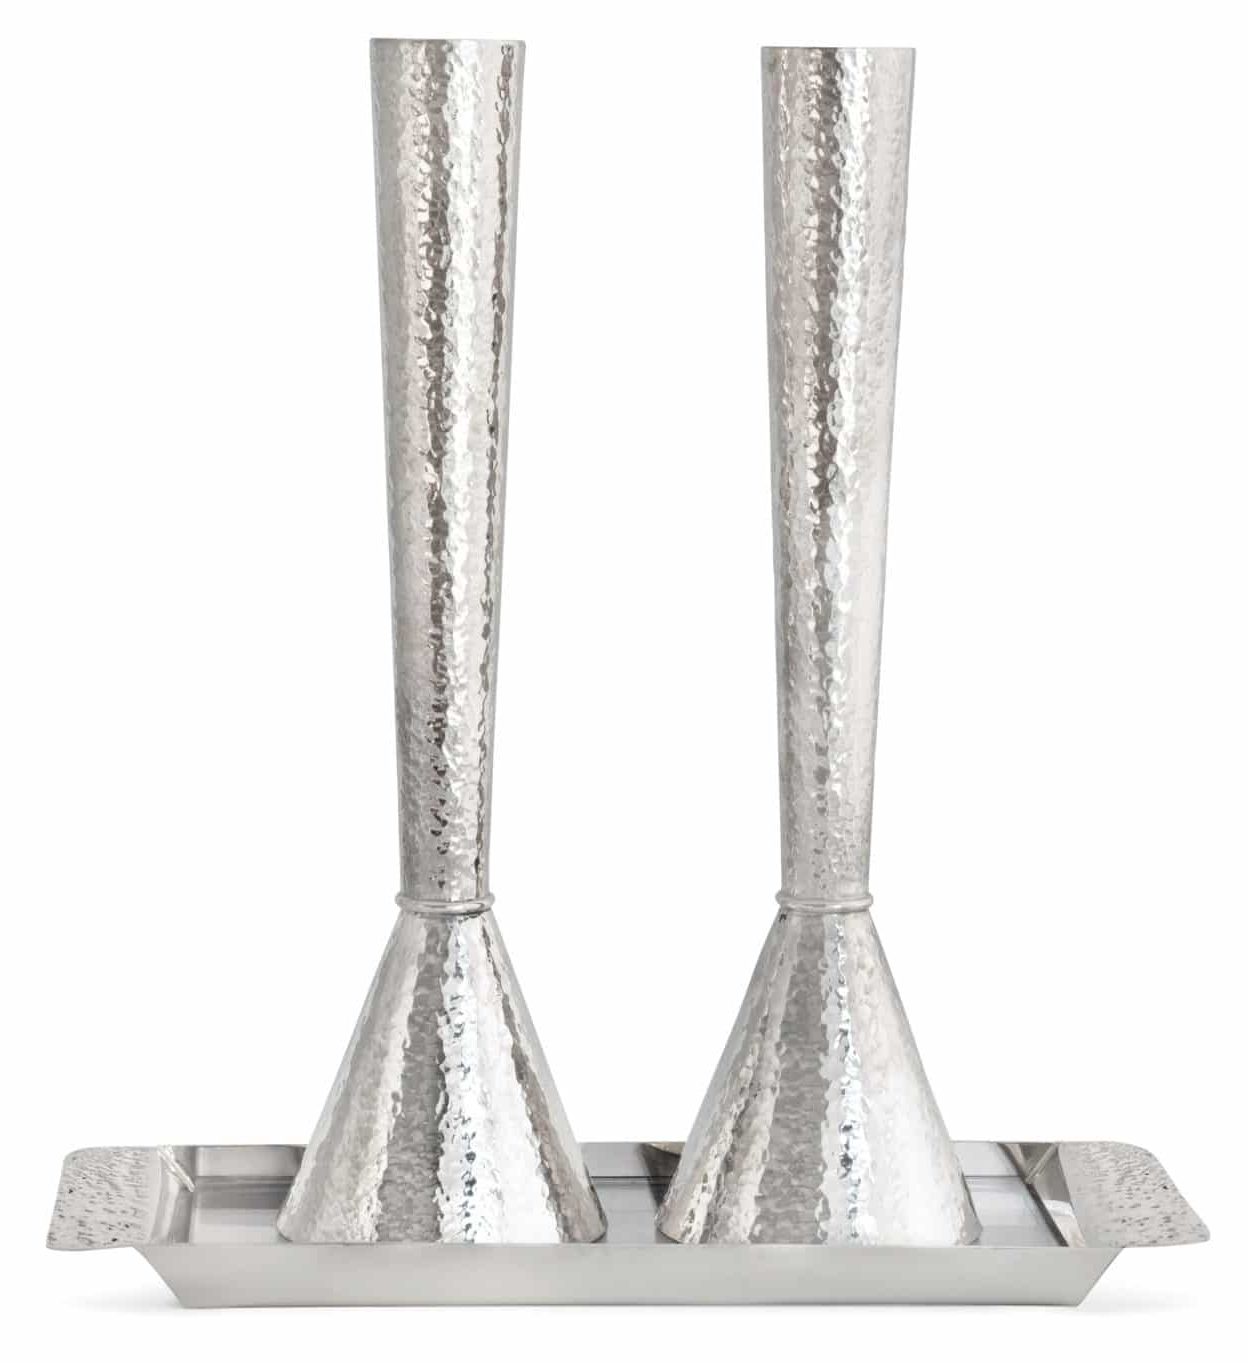 Large Silver Hammered Candlesticks and Tray